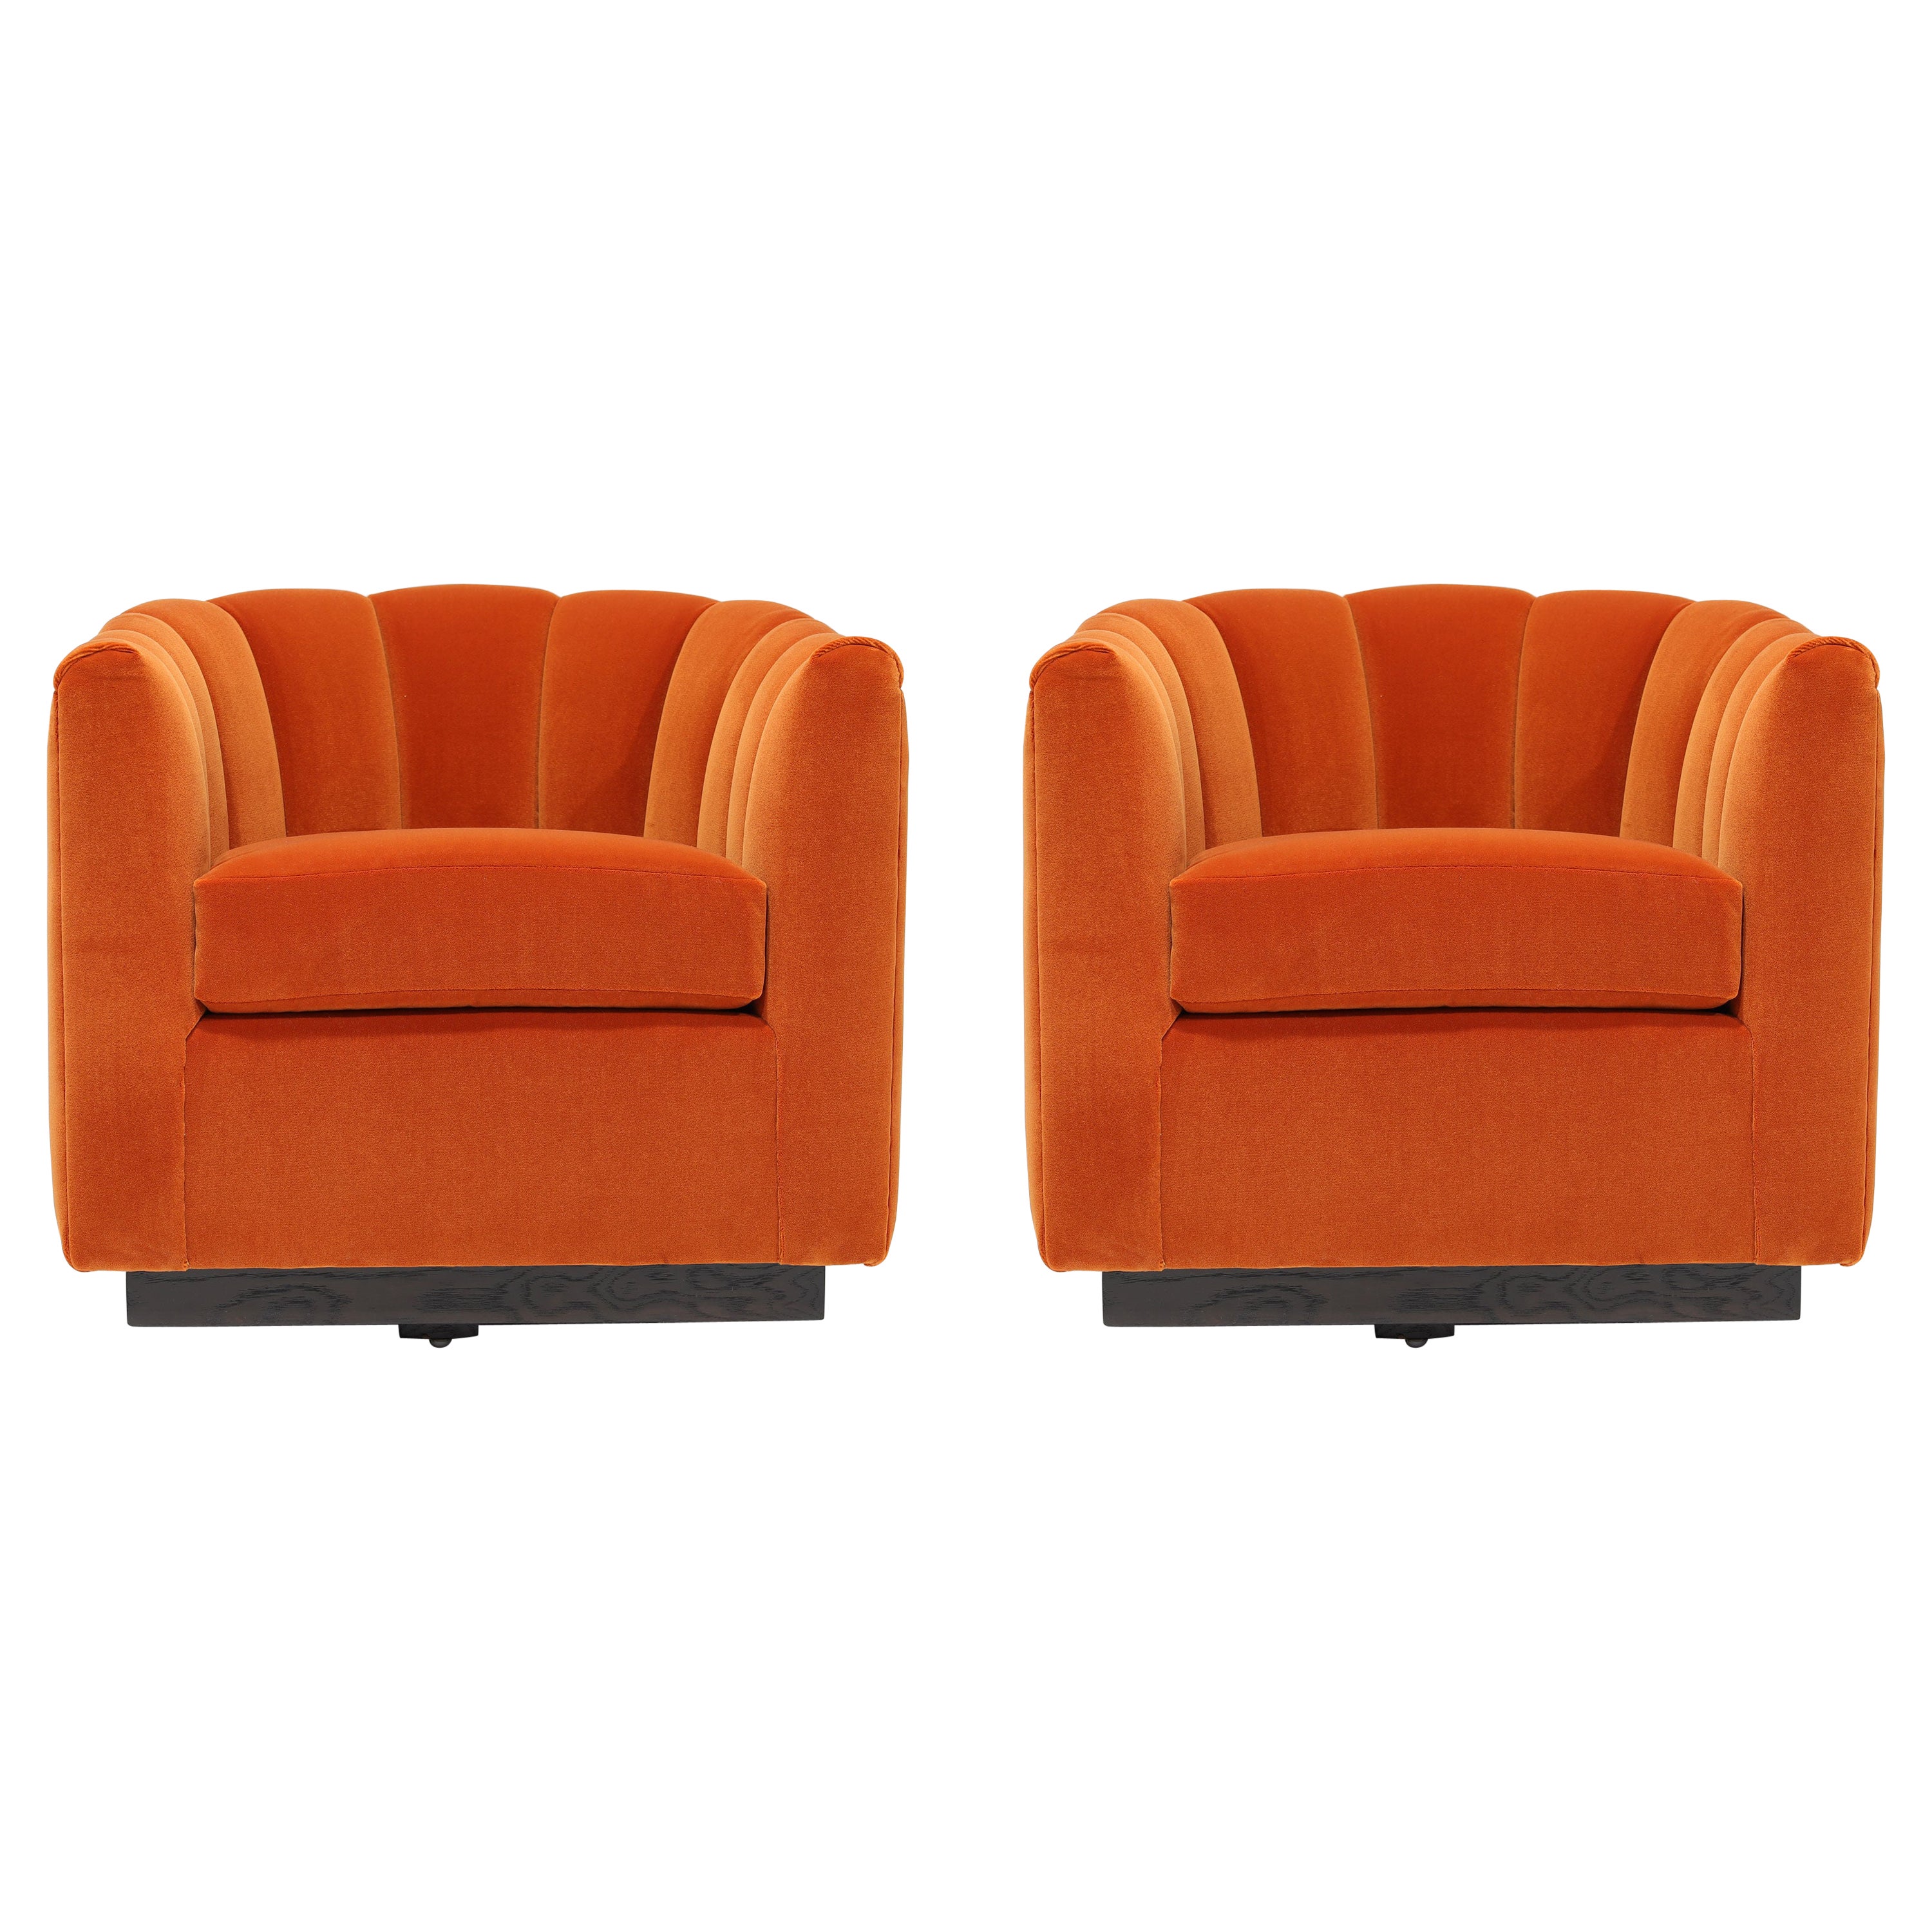 Pair of Channel Back Swivel Chairs, 1970s For Sale